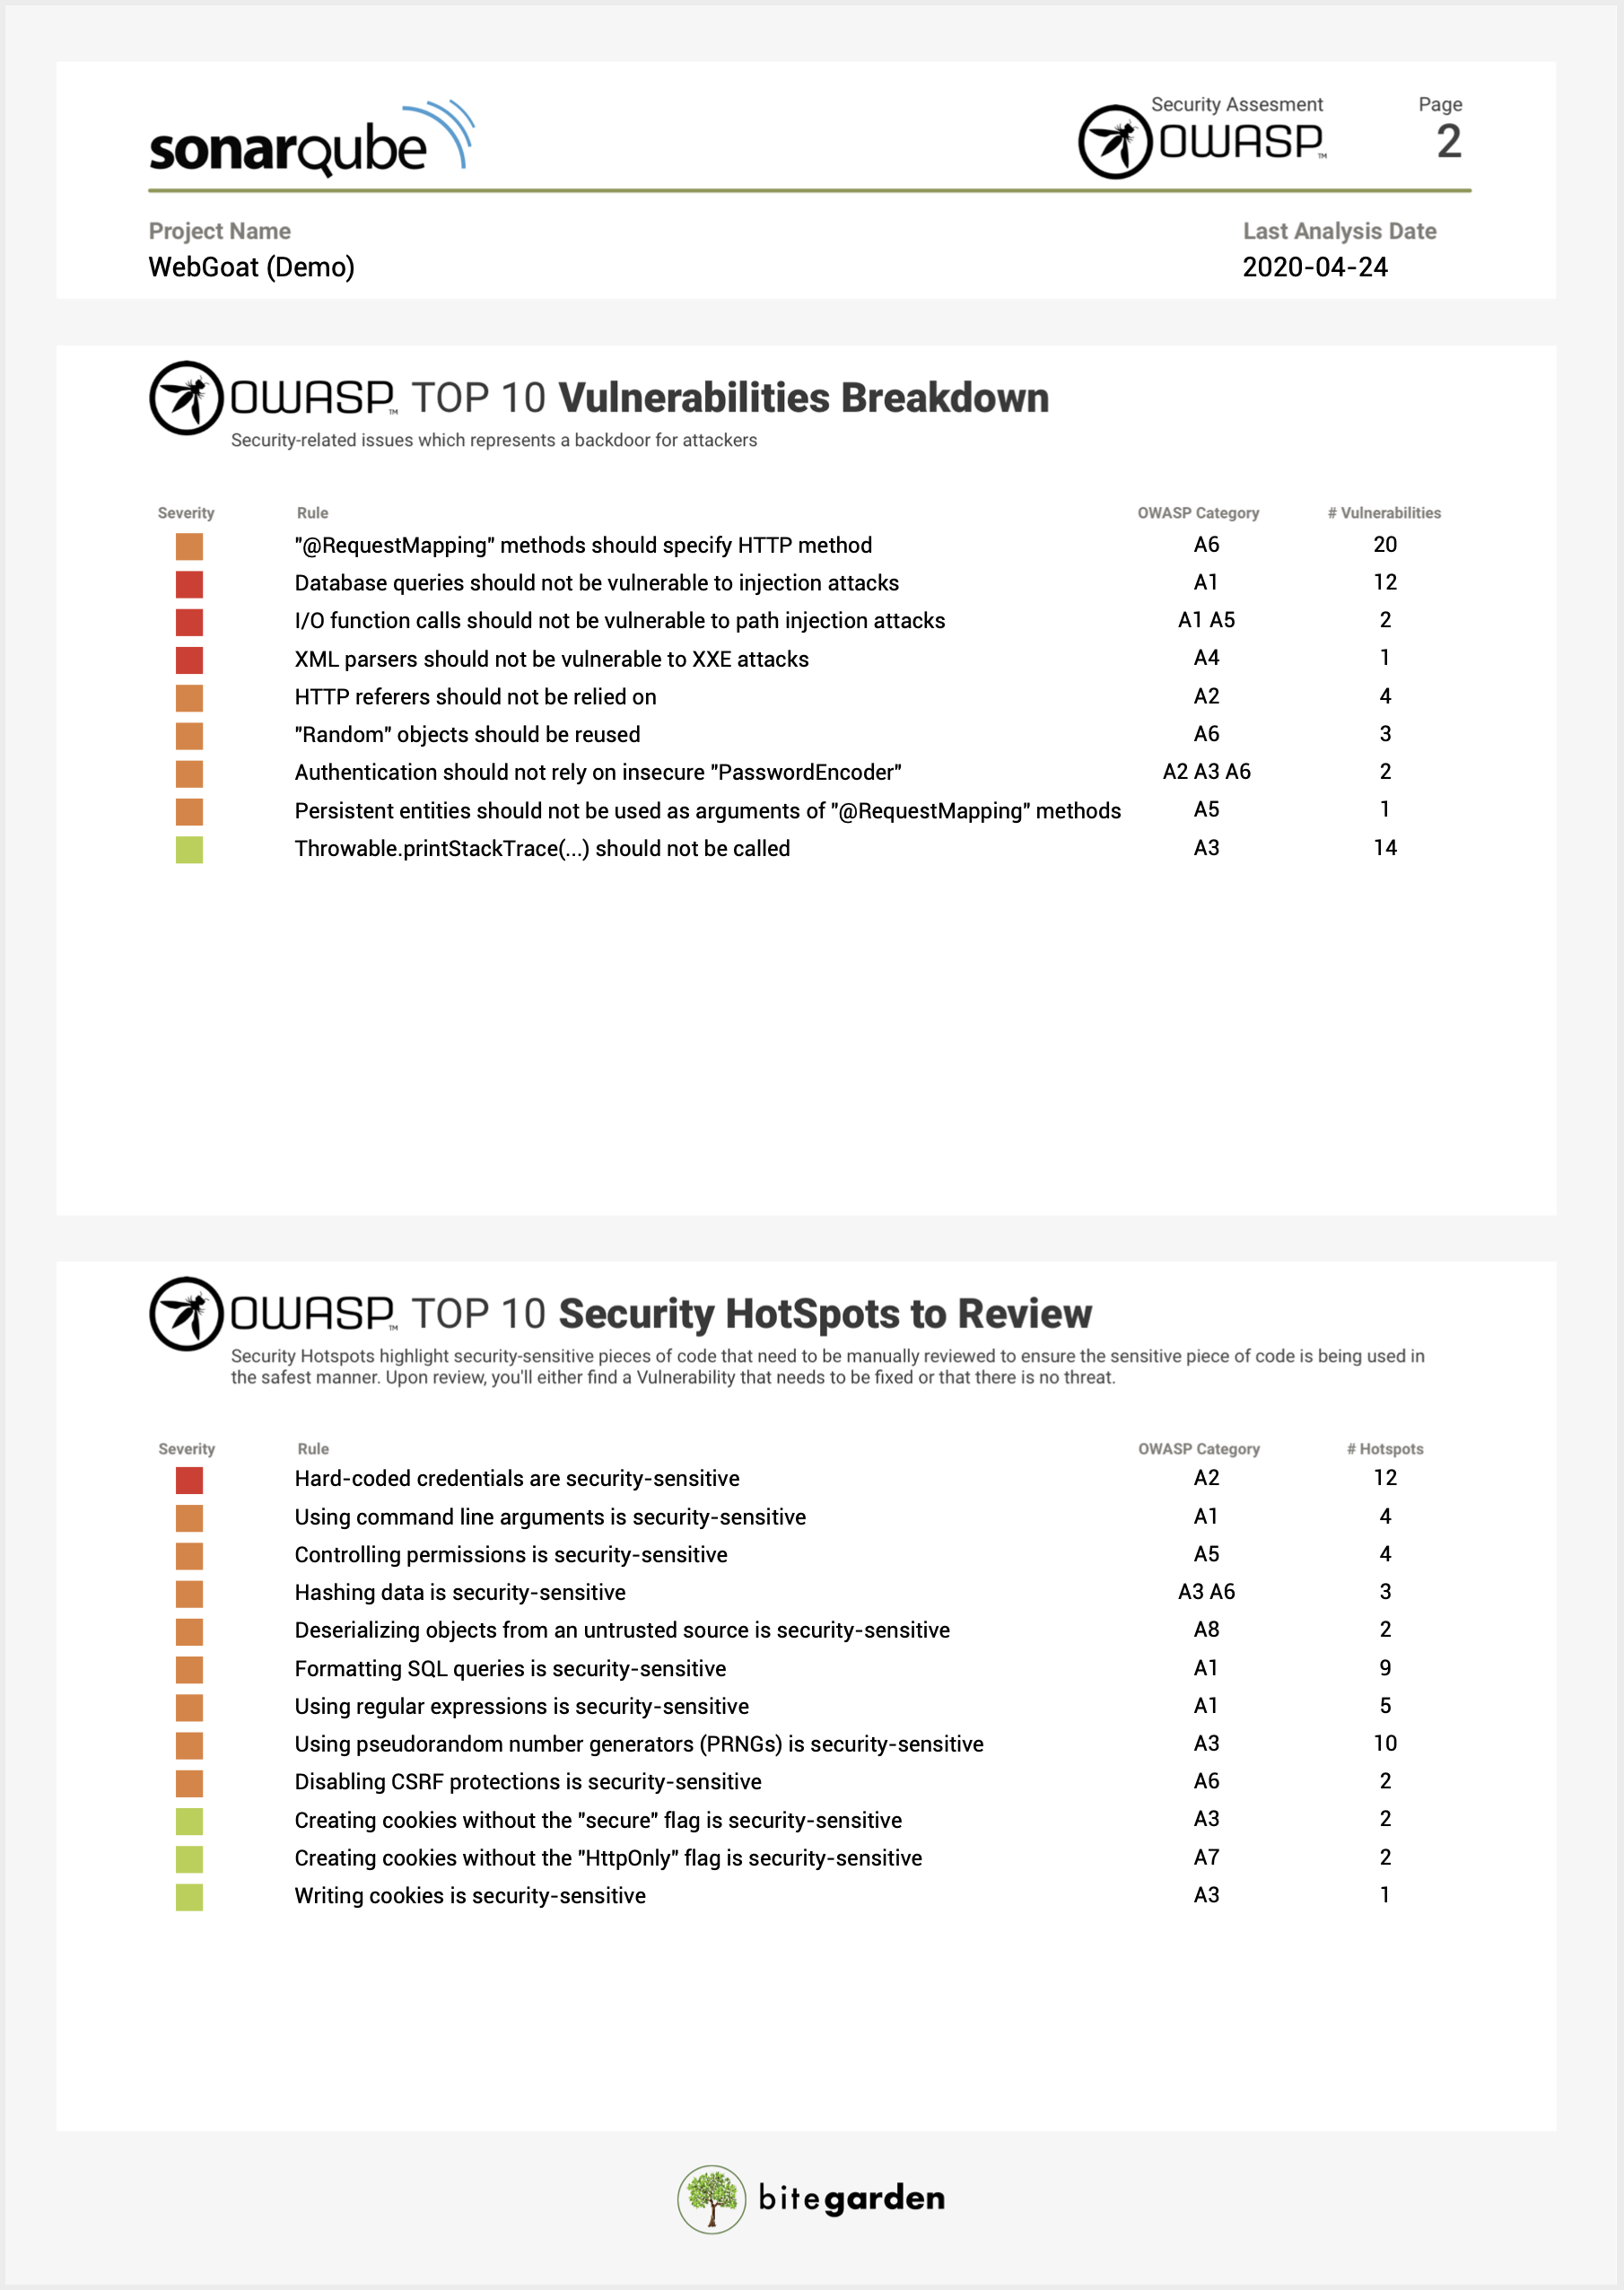 owasp-report-page-2